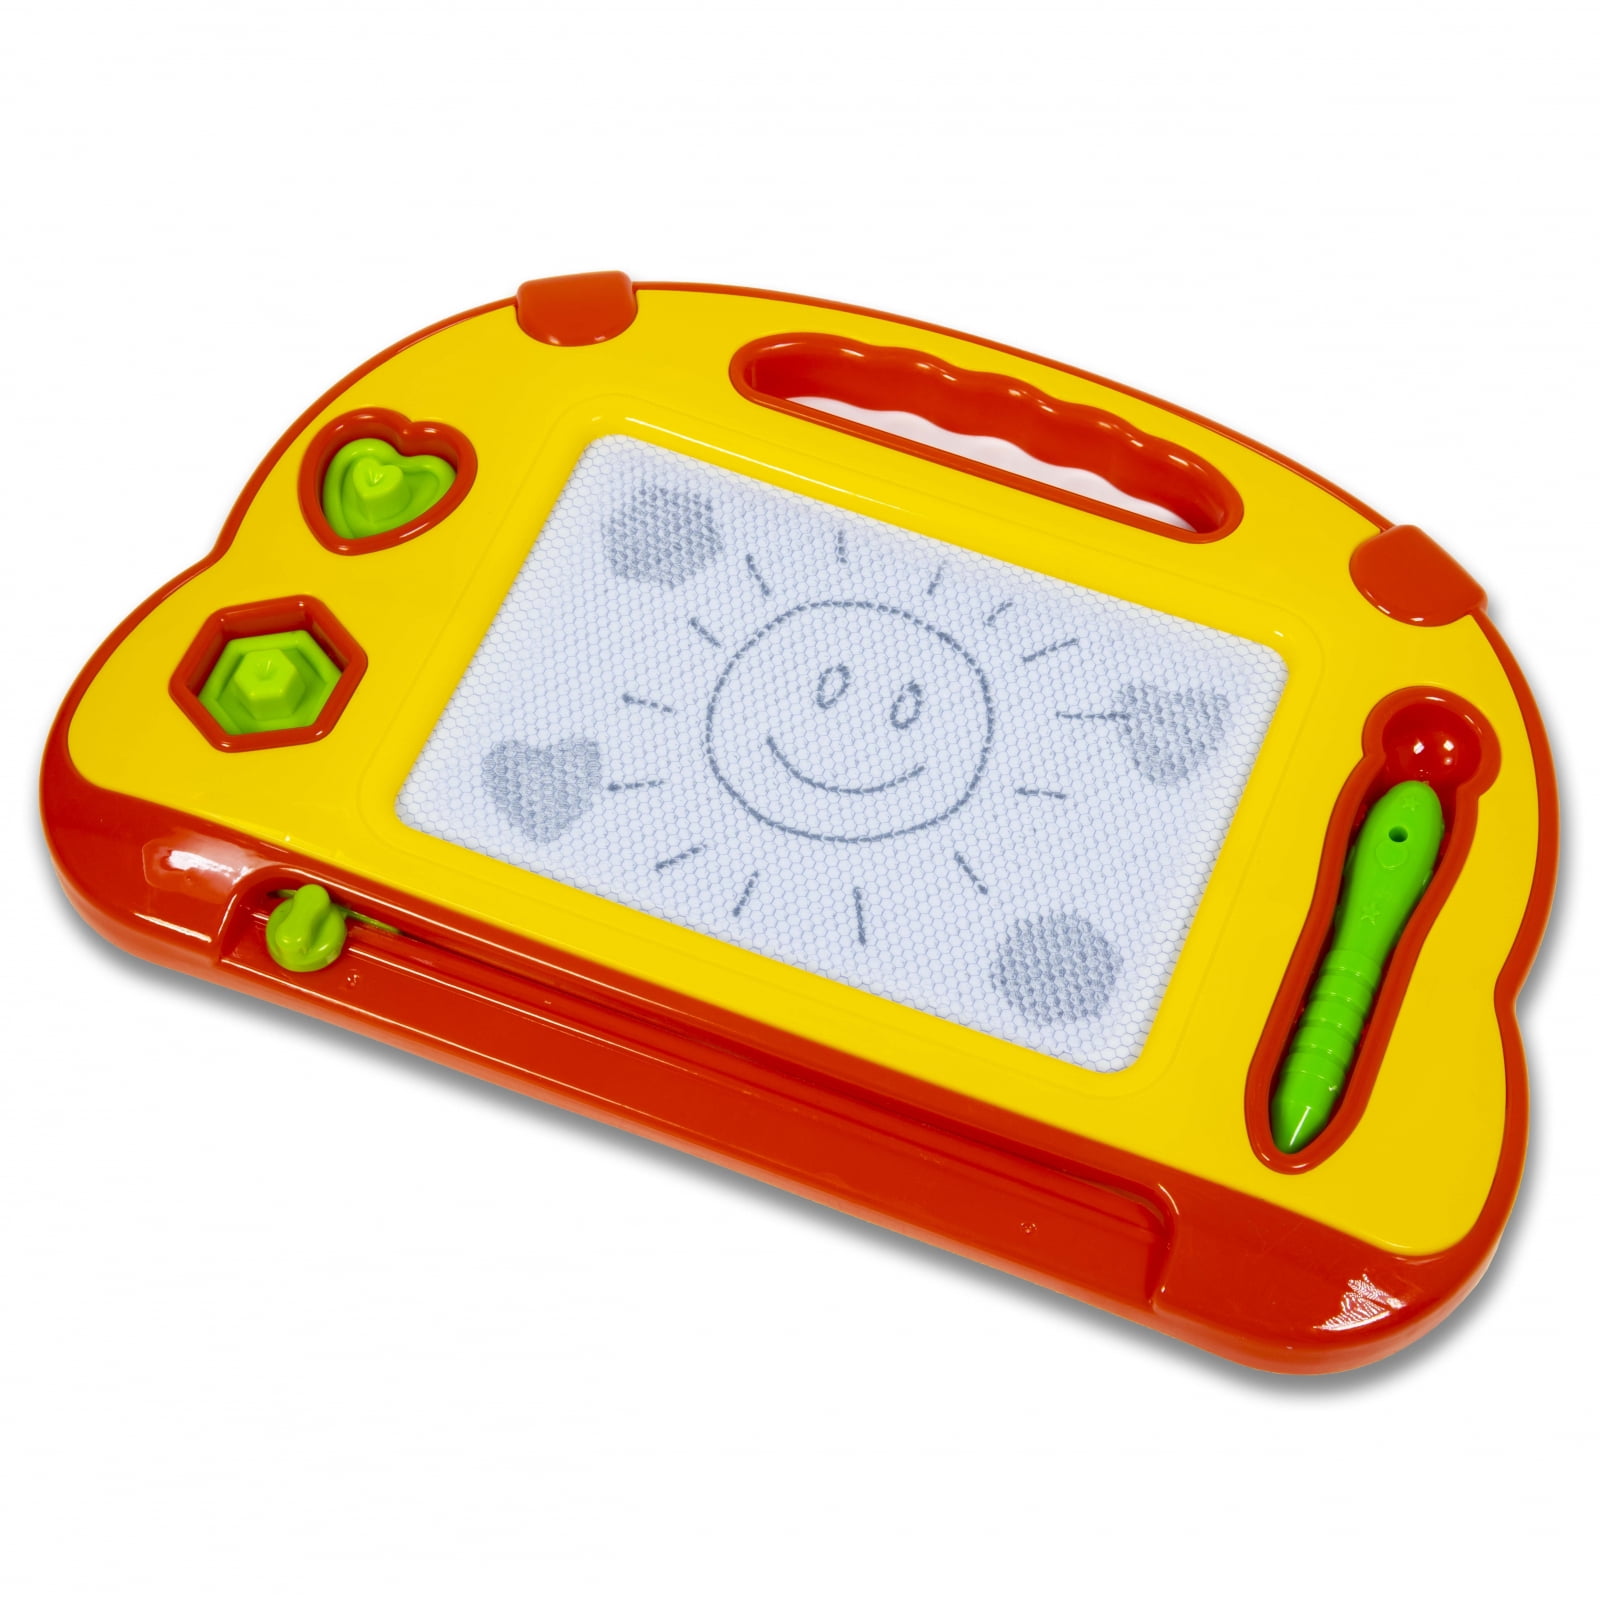  MOONKEE Magnetic Drawing Board Pen - Puzzle Game